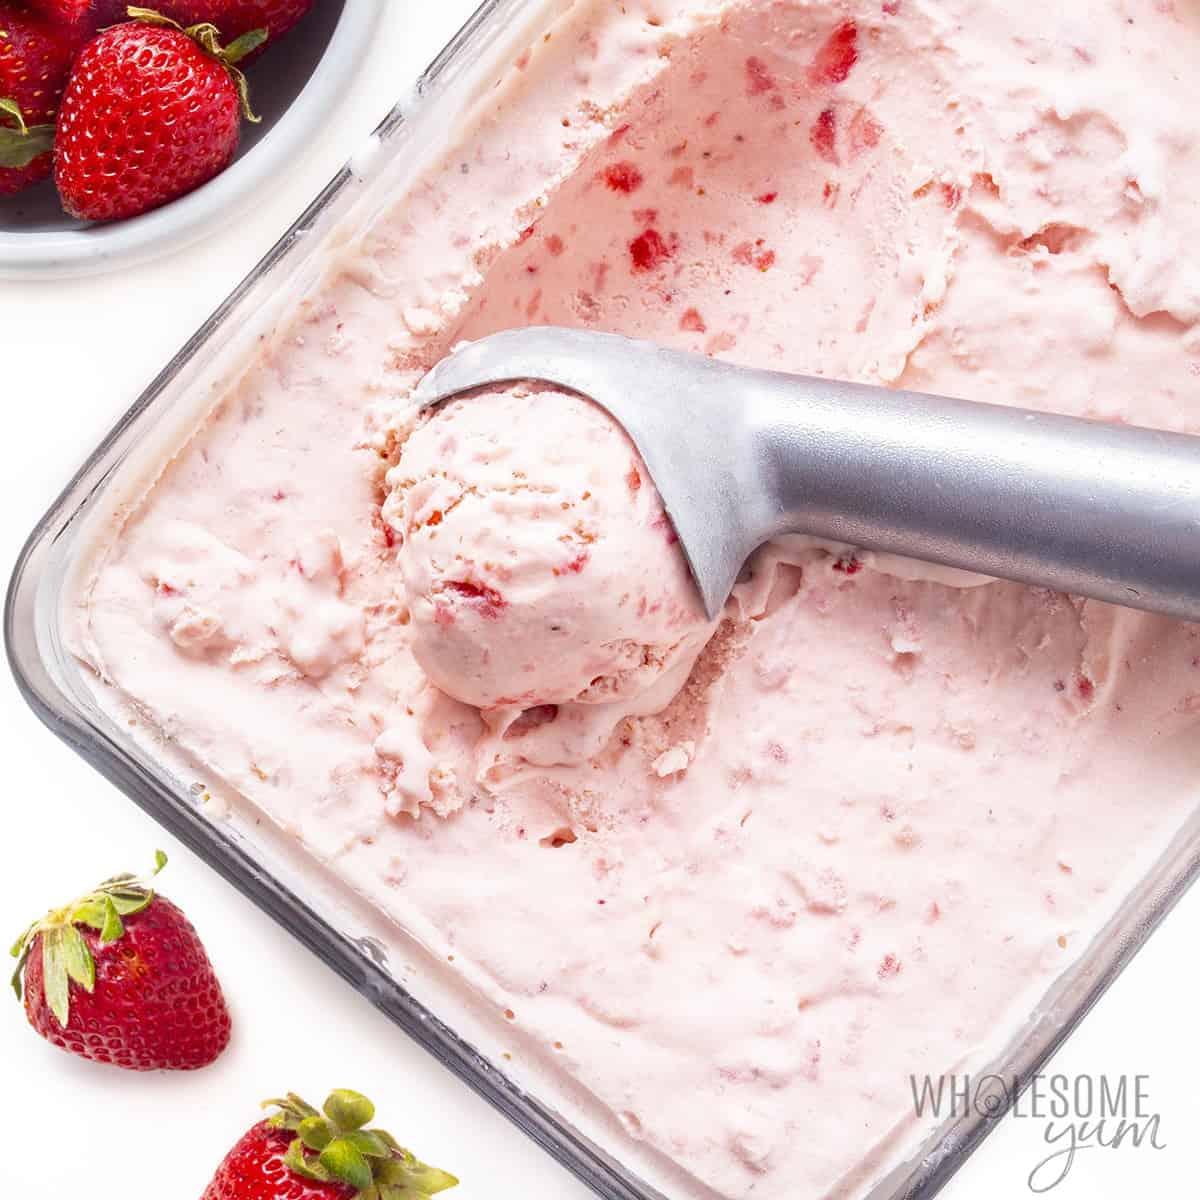 Ice cream in a container next to fresh strawberries.